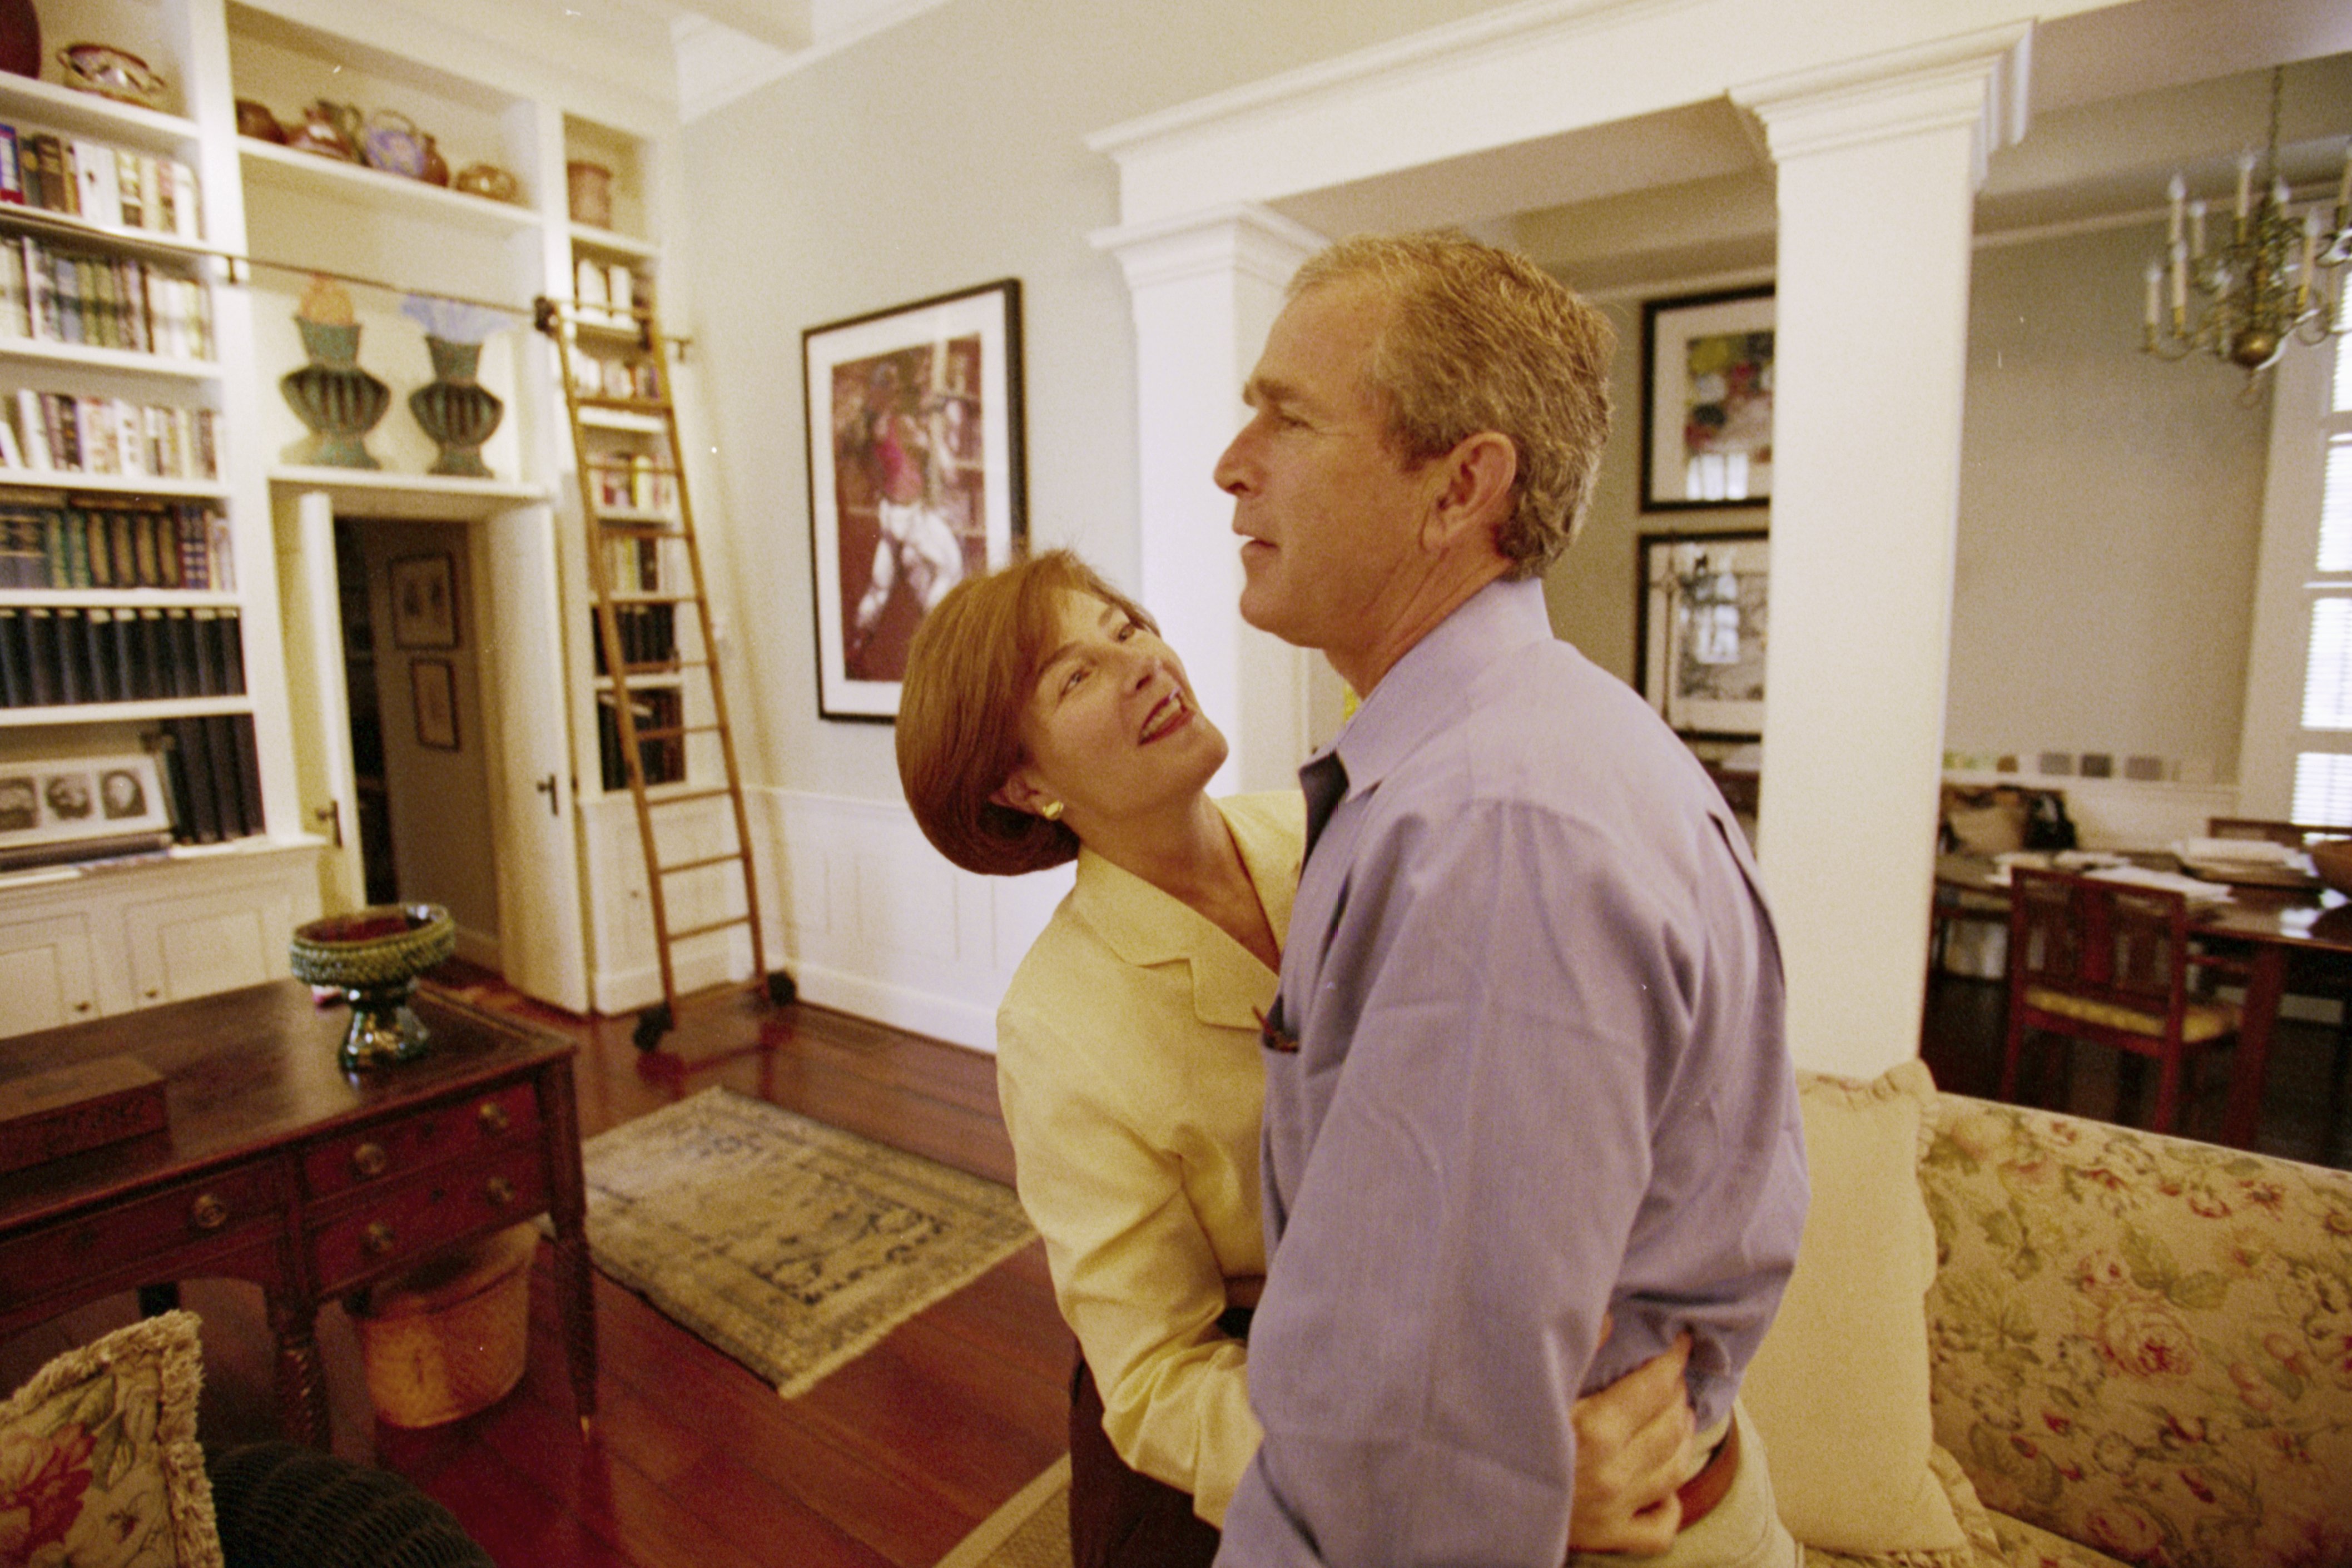 George W. Bush and his wife Laura share a hug while at the Governor's Mansion in Austin, Texas. November 15, 2000 | Source: Getty Images 